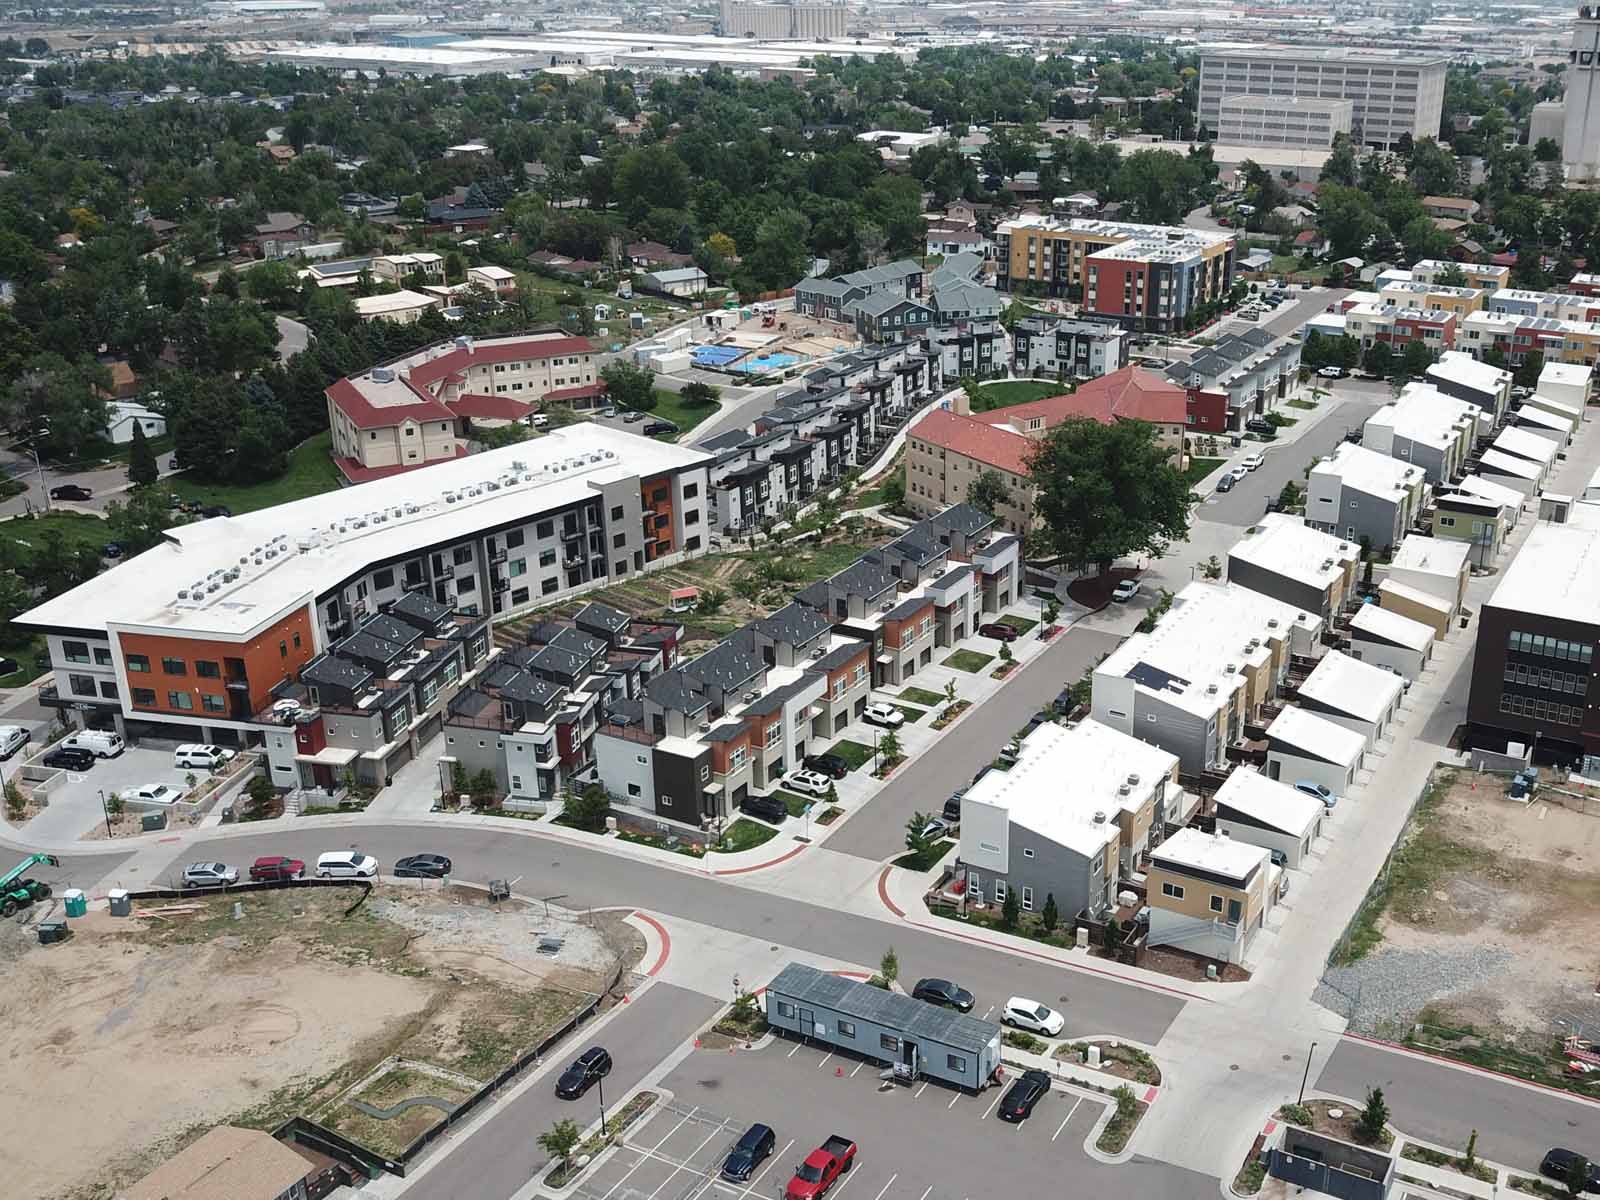 Aria Denver, Zen Condos, Luxury Denver Colorado Townhomes Drone View - Weins Development Group - Award-winning real estate developers in Denver, Colorado. Top #1 of Builders producing high-quality townhomes, condos, apartments, retail, & office projects